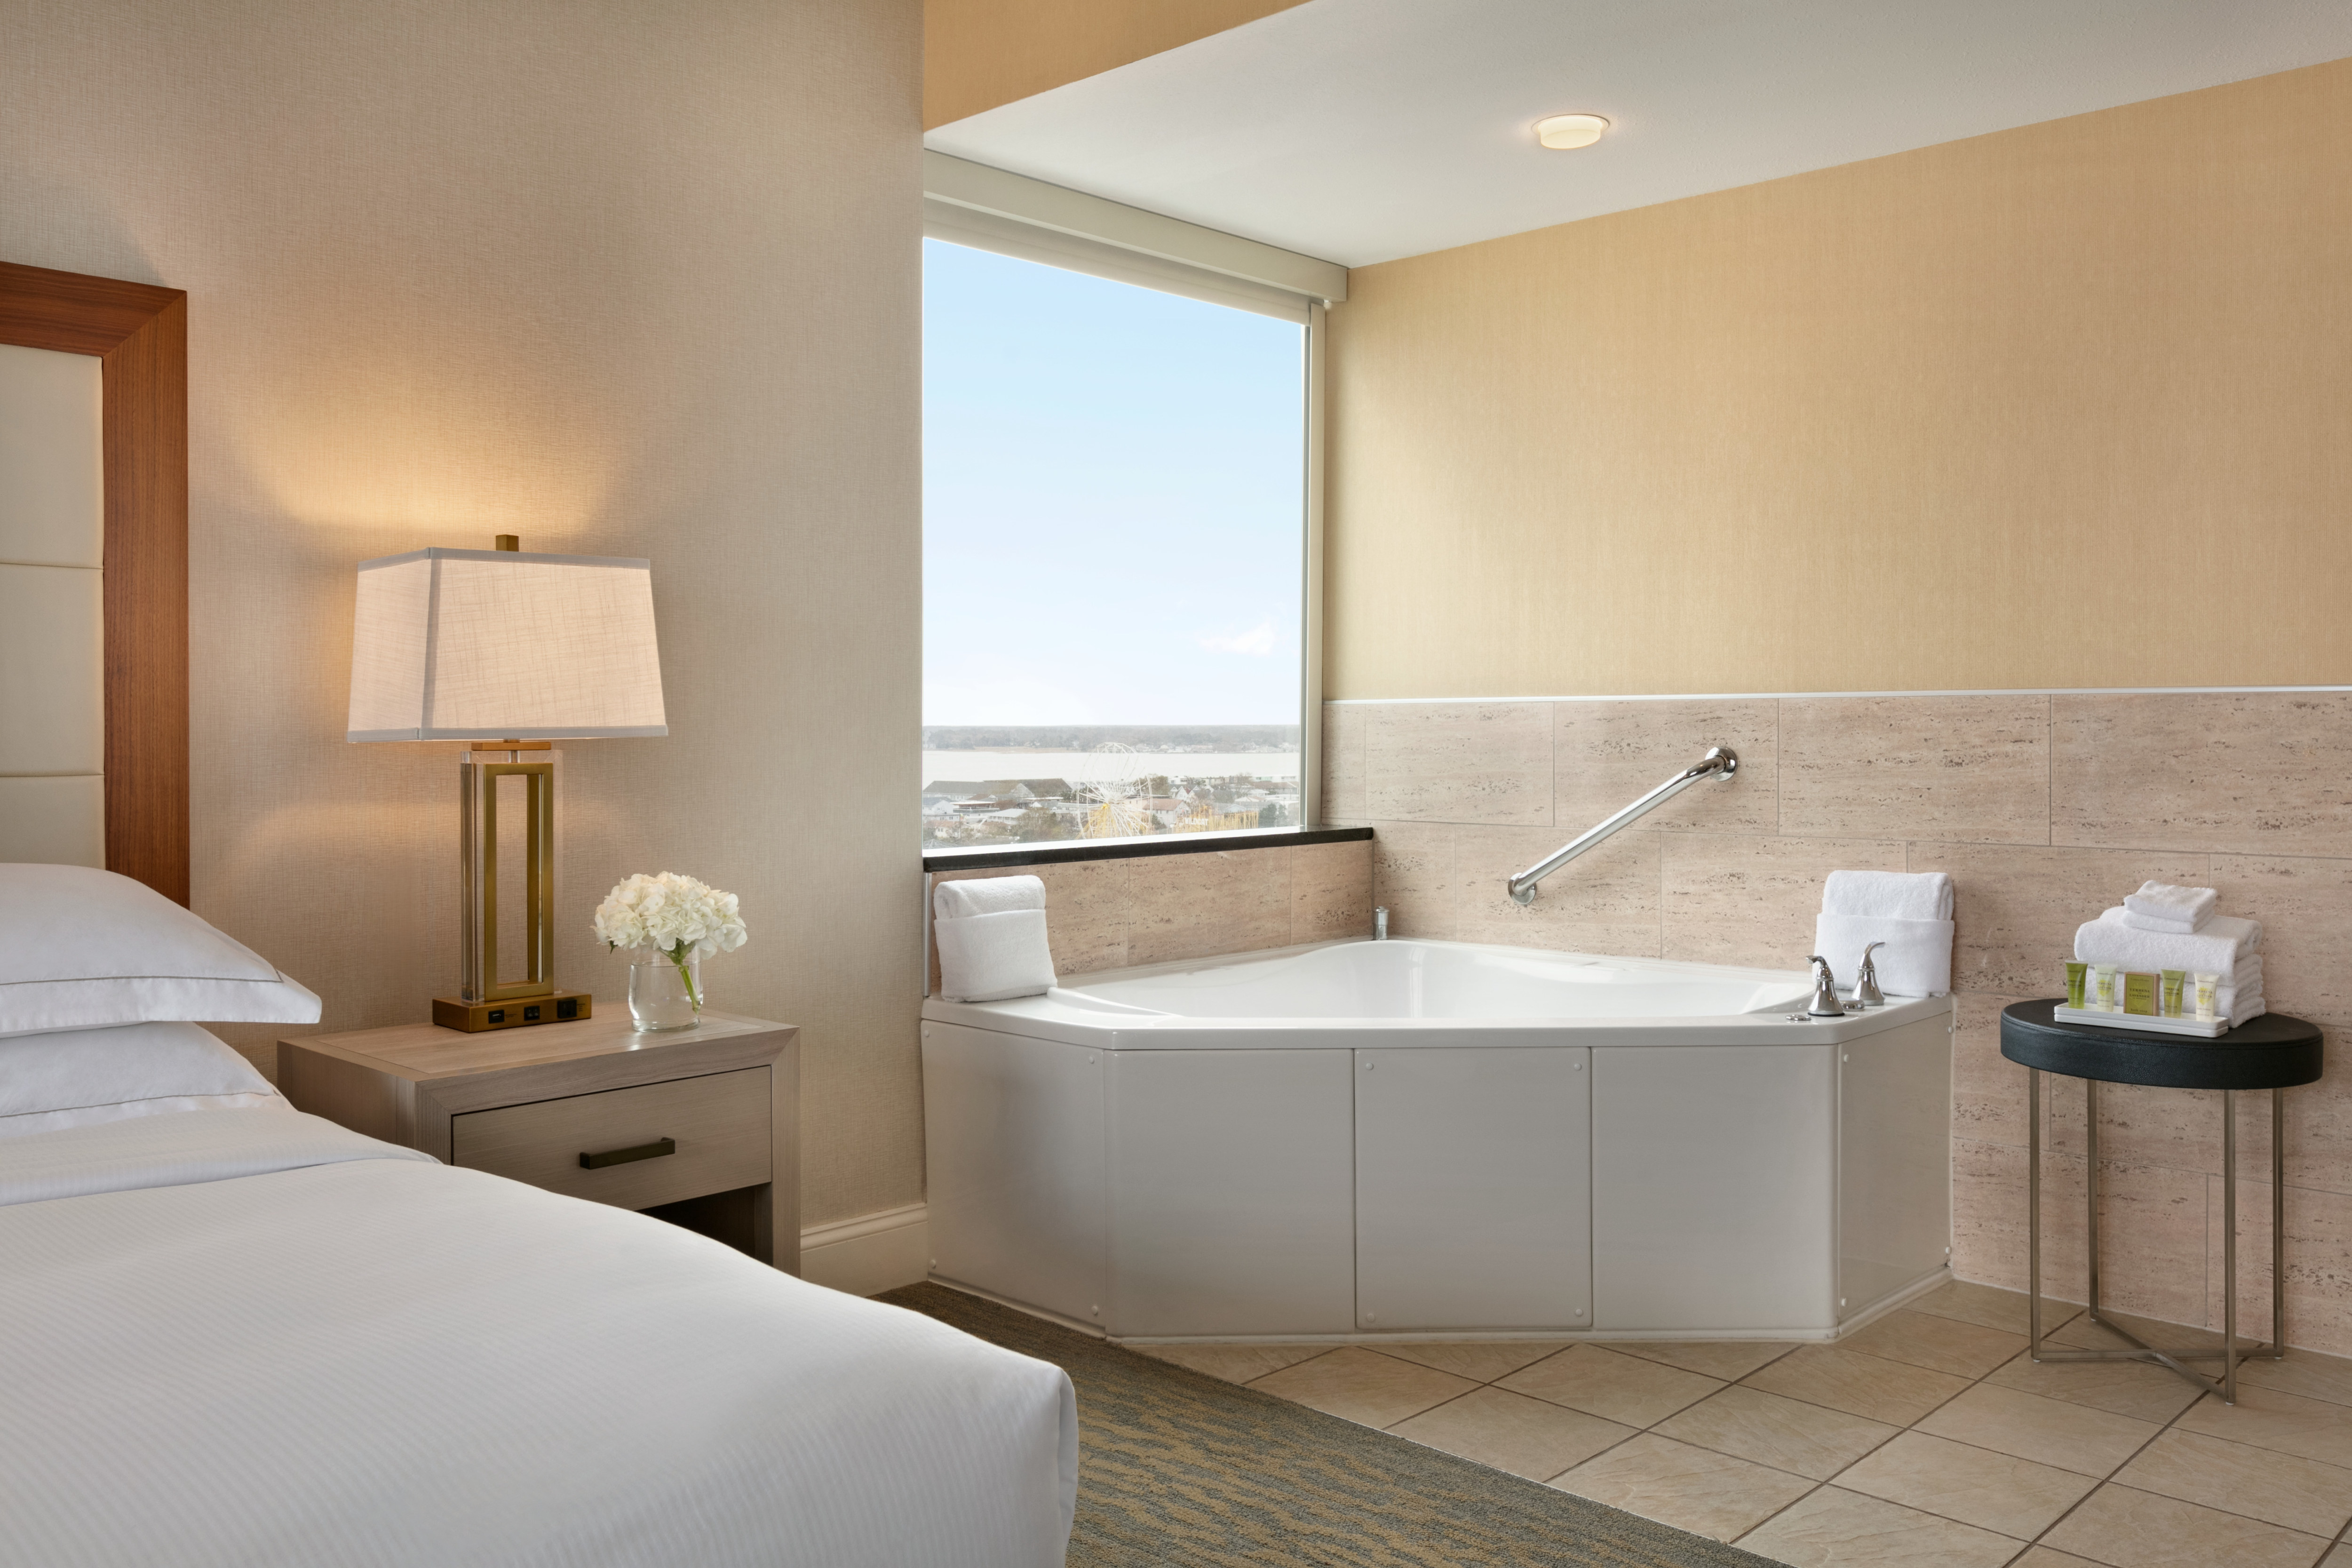 Guestroom with King Size Bed, Bedside Table, and Spa Tub with Ocean Outside View